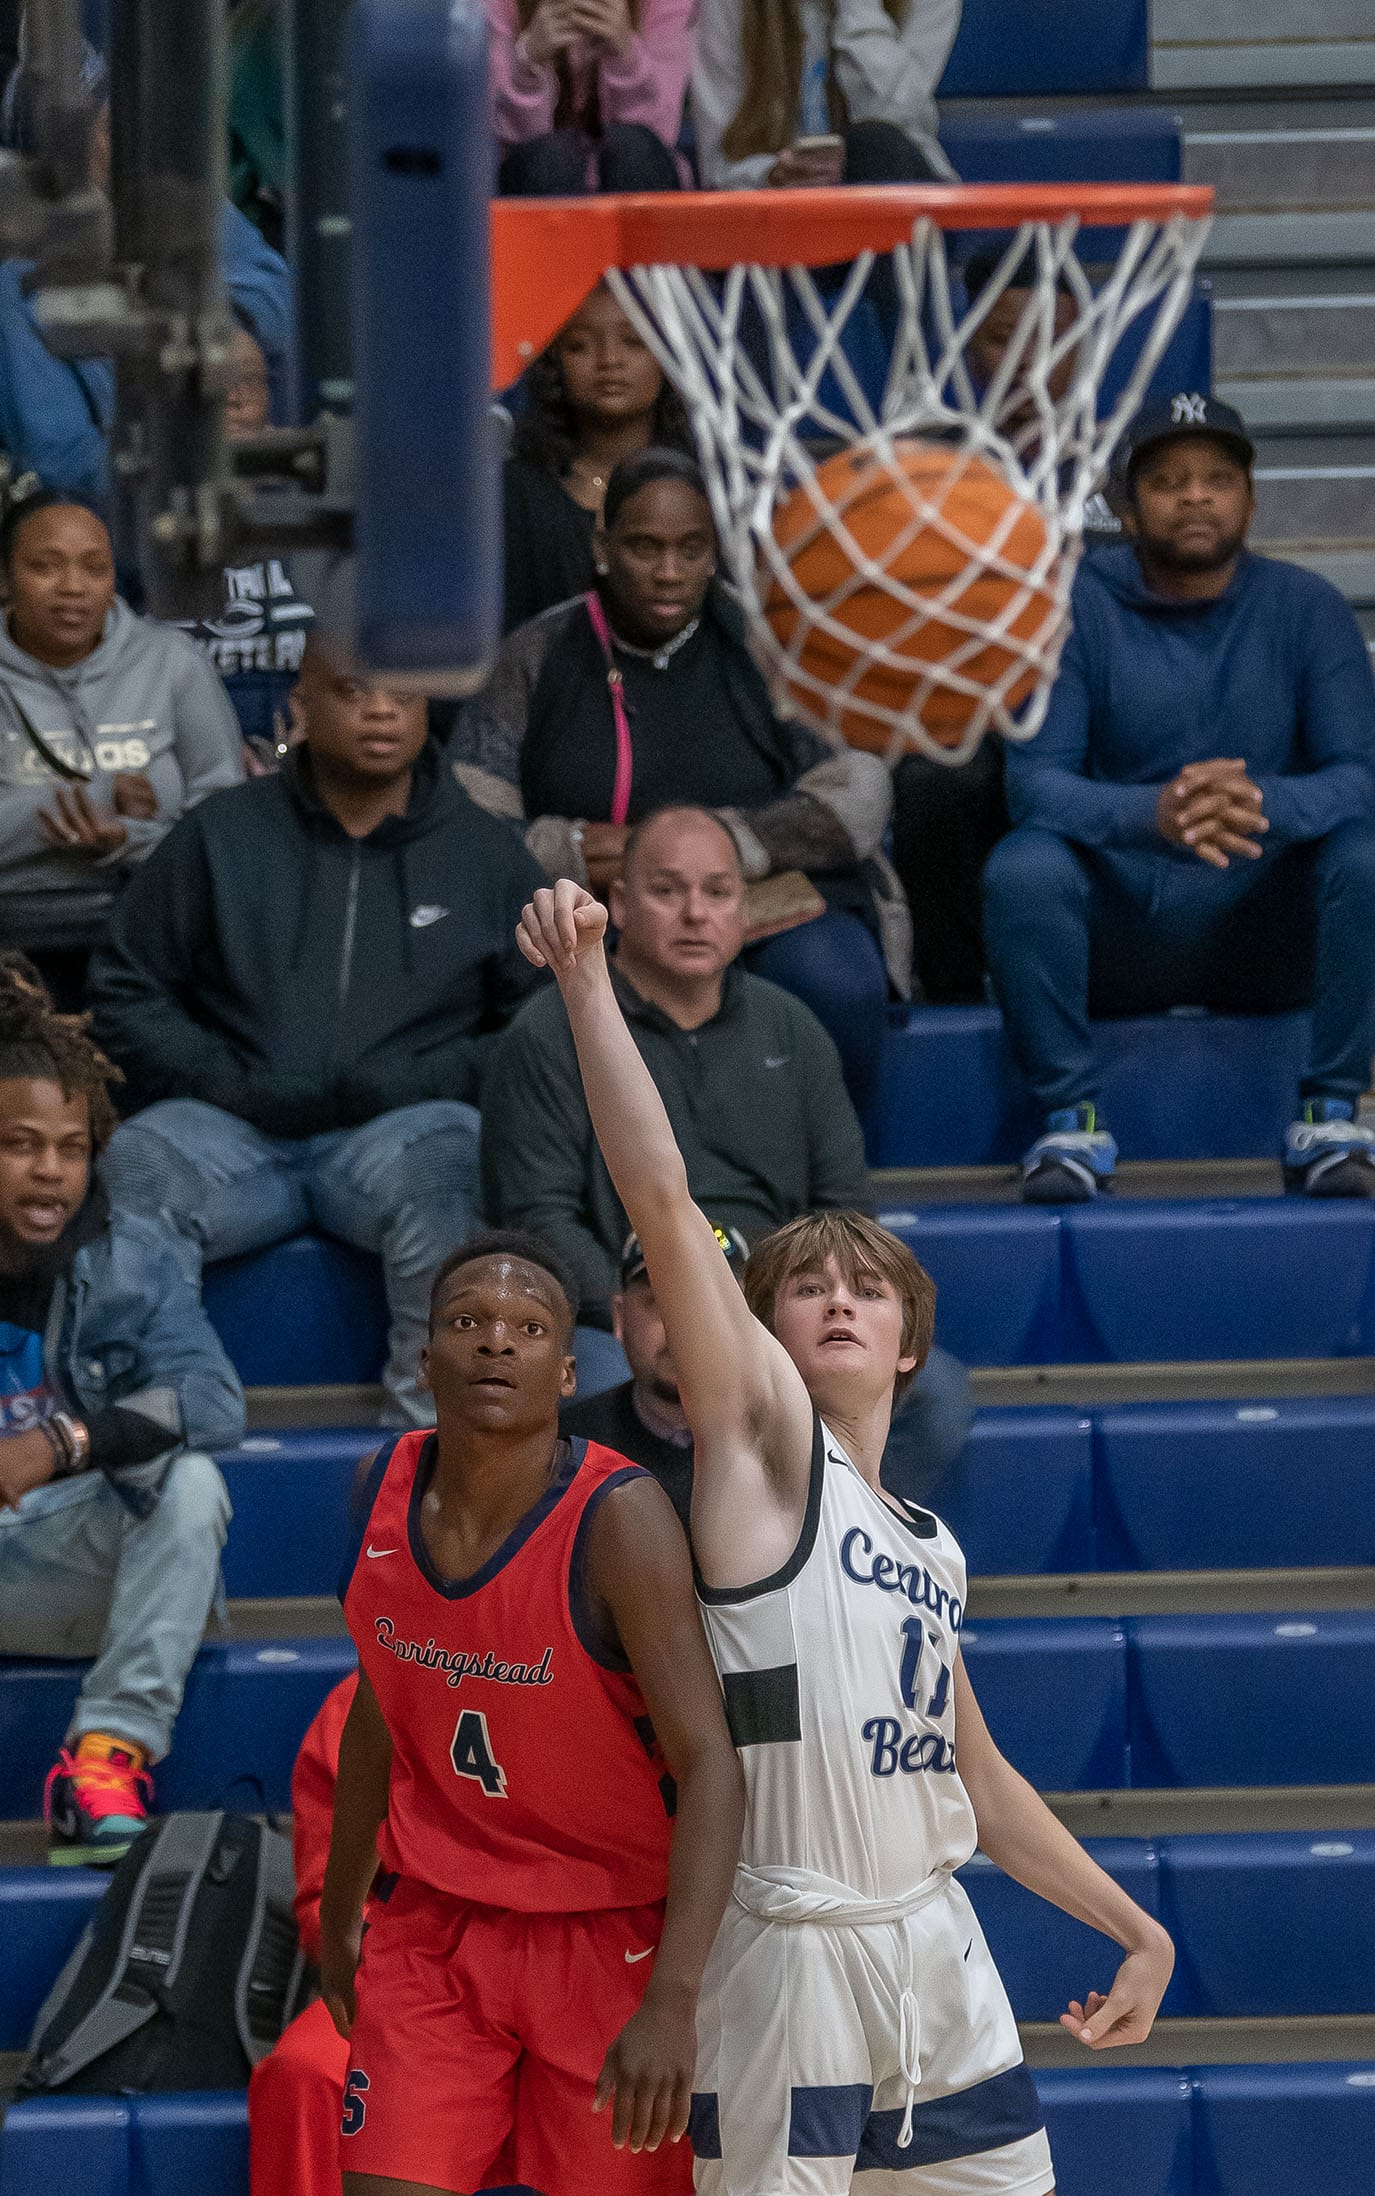 Springstead High, 4, Caidell Gilbert and Central High, 11, Ethan Bergantino watch Bergantino’s three point shot Friday at Central High. Photo by JOE DiCRISTOFALO